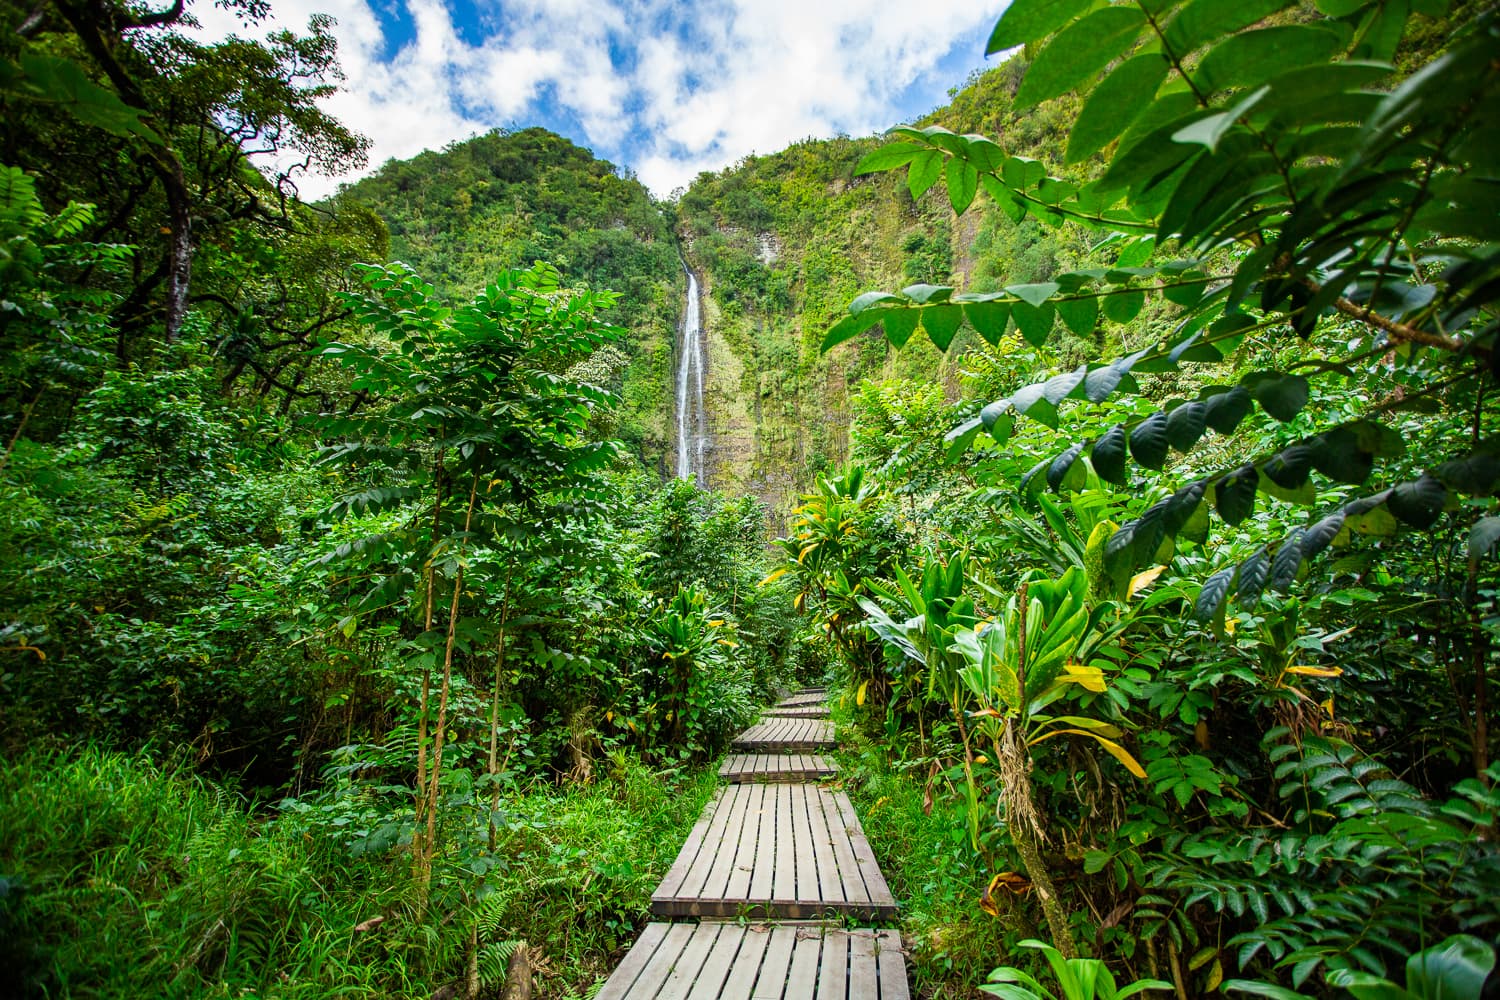 view of Waimoku falls with jungle on either side of a central boardwalk.